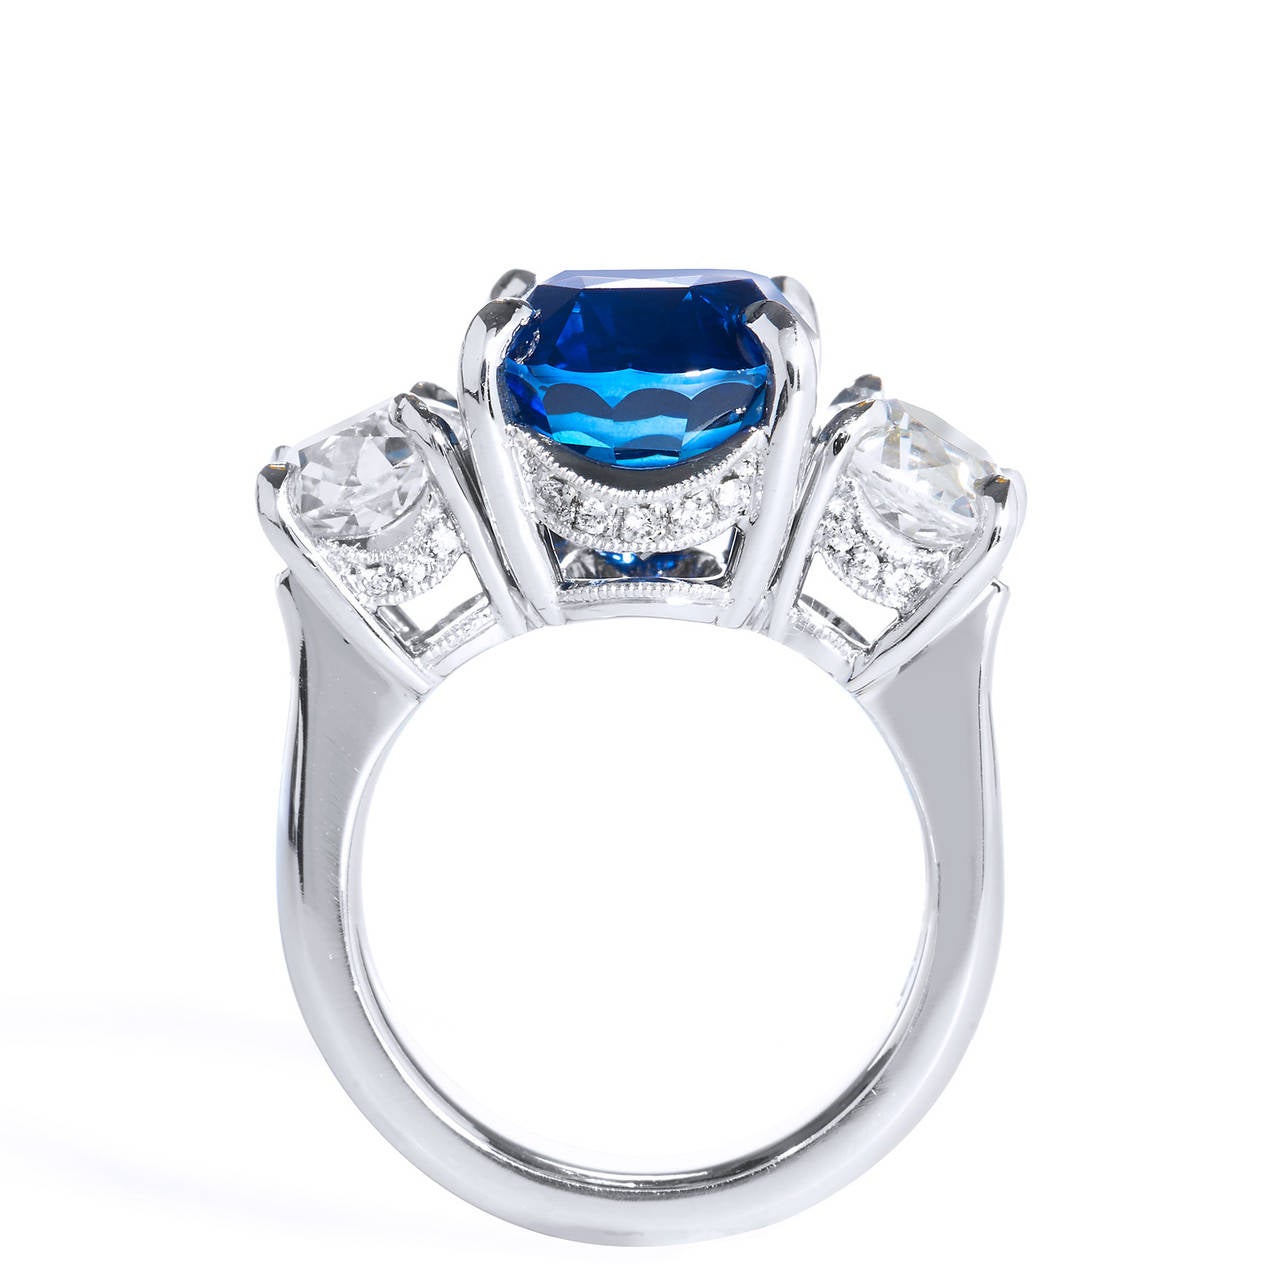 GIA Cert 10.16 Carat Vivid Blue Sapphire and Diamond Platinum Ring Size 5.5

Throughout history, the sapphire has symbolized truth, sincerity and loyalty; and thought to bring peace, joy and wisdom to its wearer. These characteristics combined with